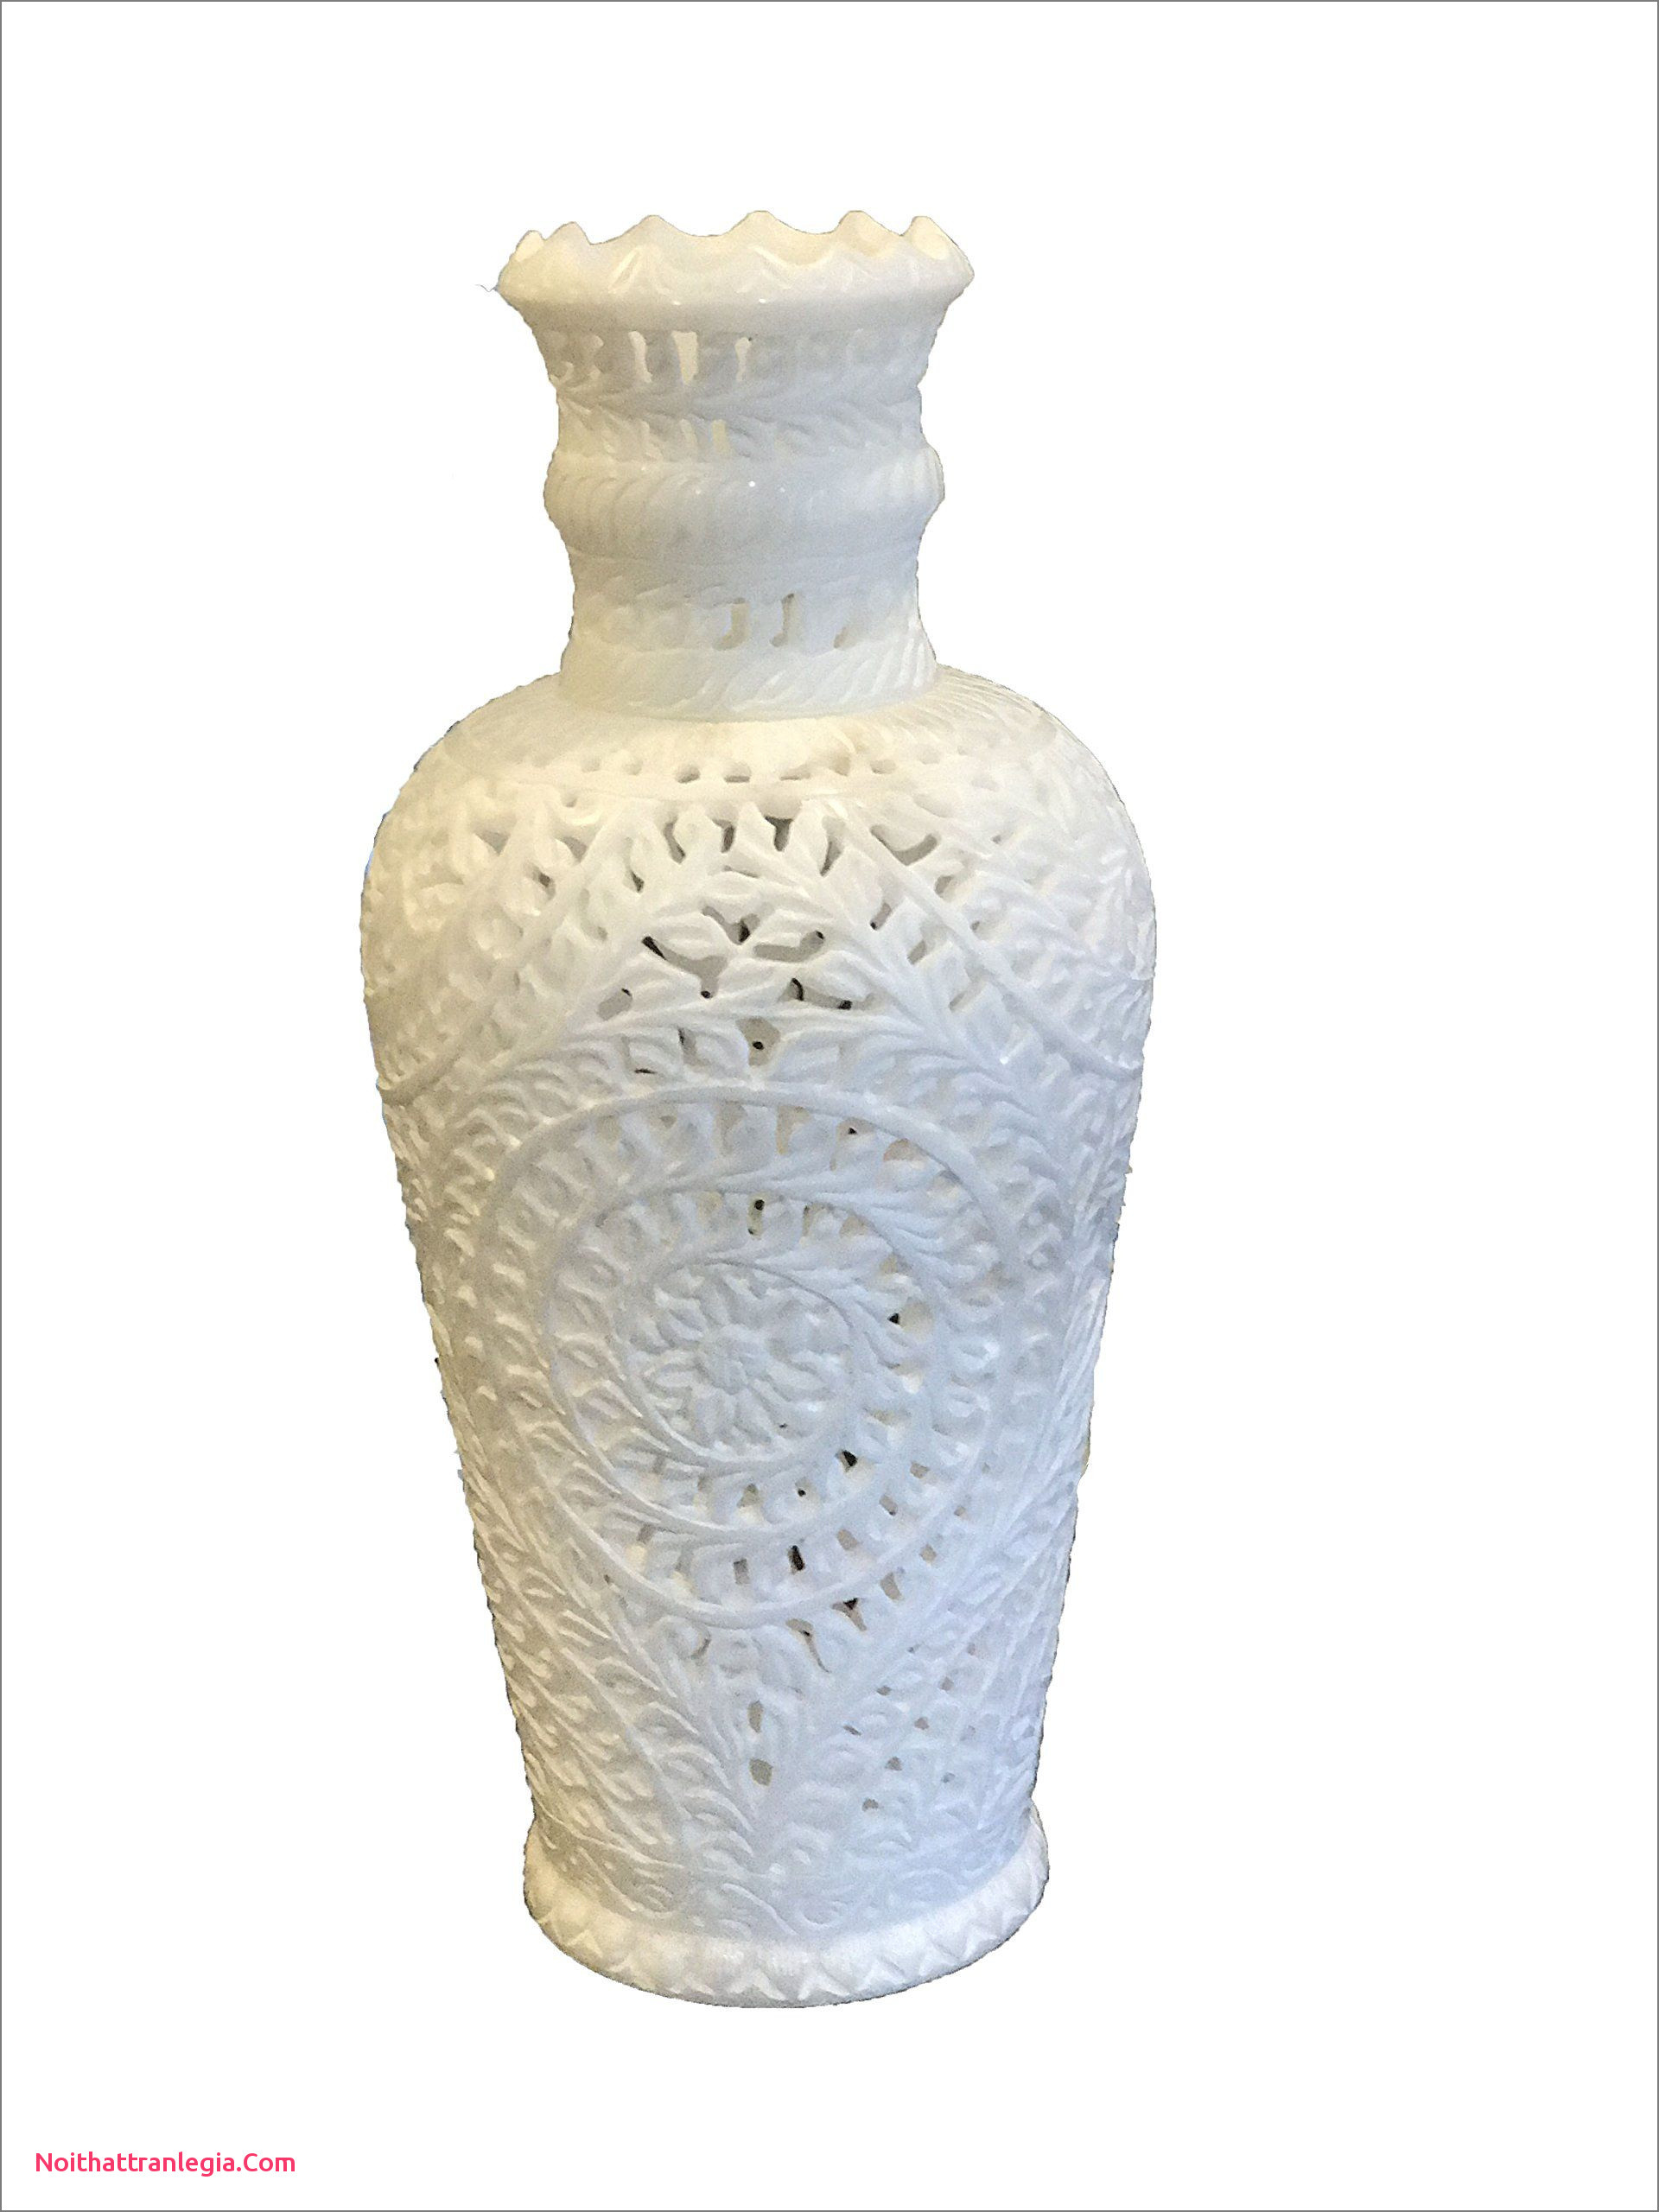 13 Wonderful Cheap Plastic Vases 2024 free download cheap plastic vases of 20 how to clean flower vases noithattranlegia vases design with regard to white marble flower vase handcrafted stone decorative wedding diy vases handcrafted by artisa